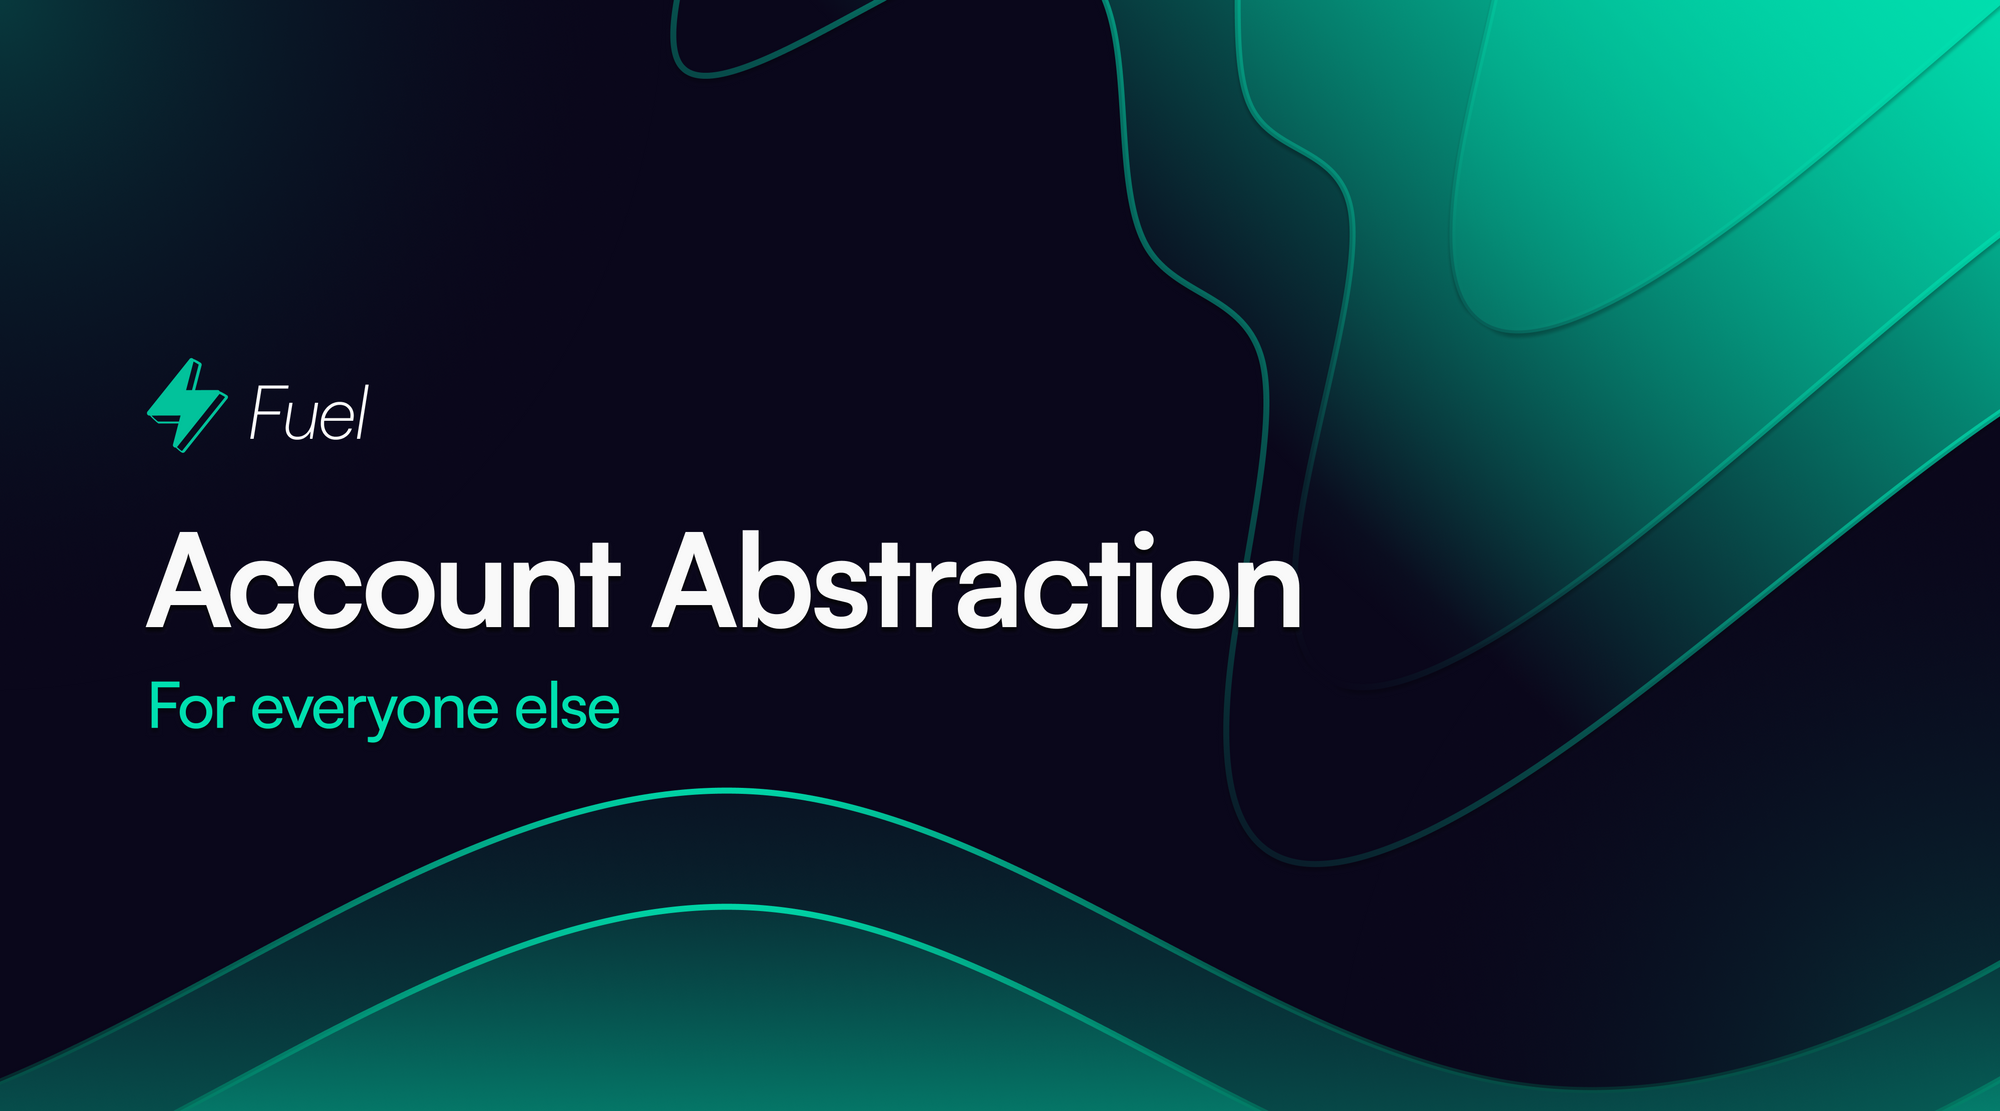 Account Abstraction For Everyone Else